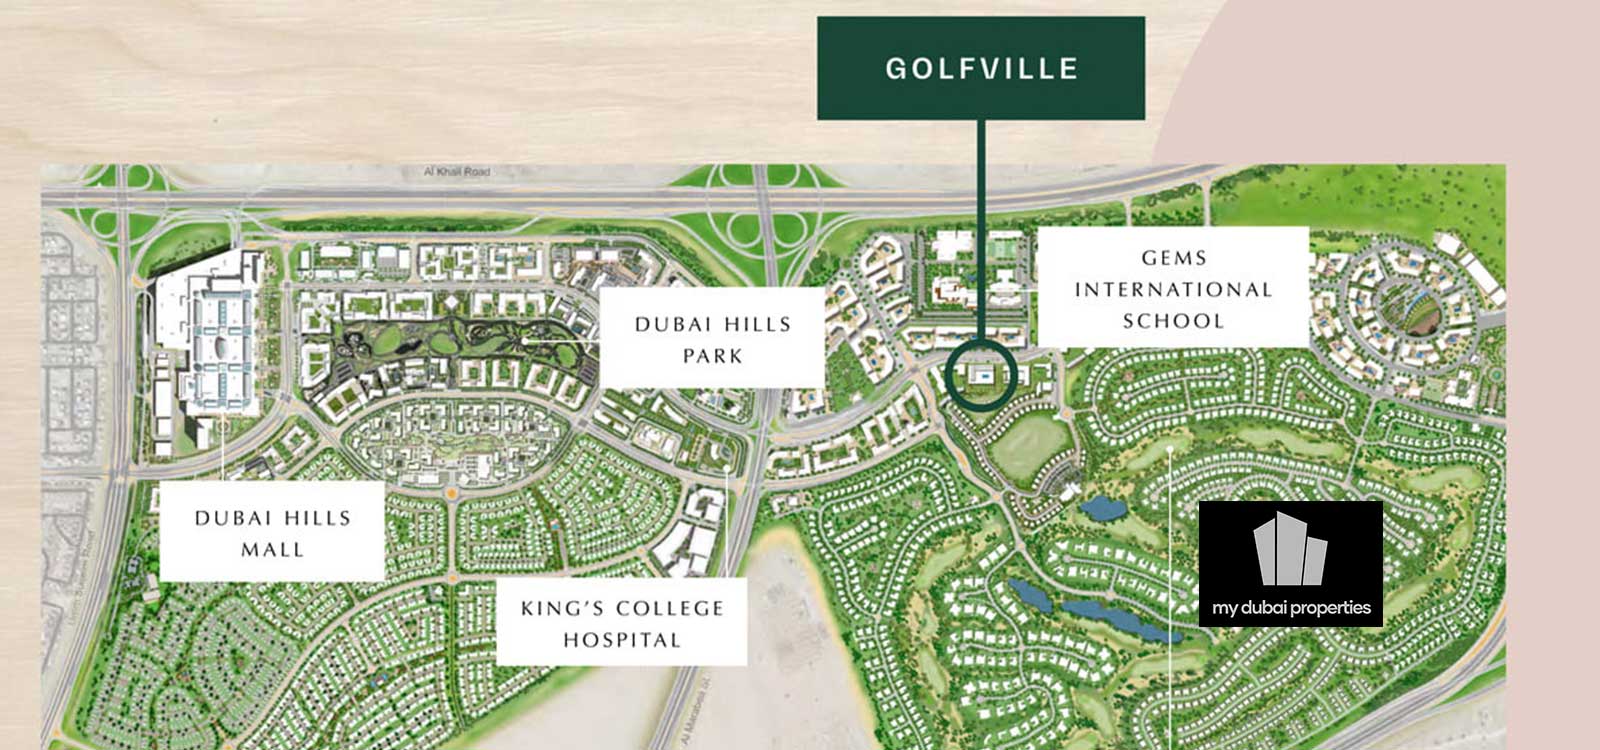 Golfville Location Map